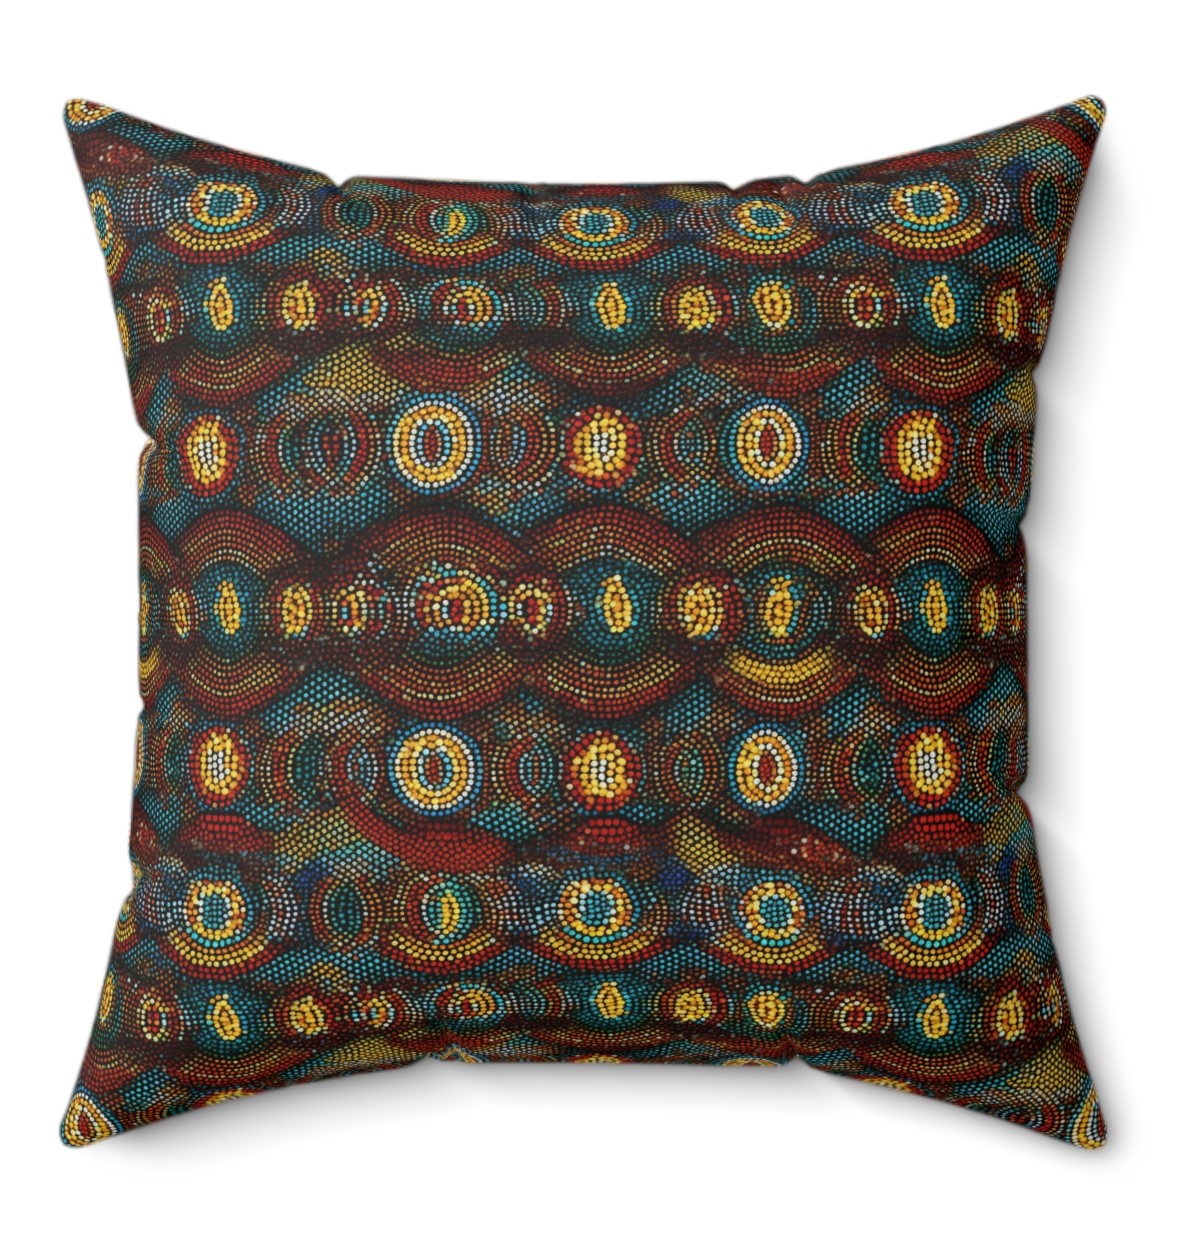 Ugandan Beaded Microfiber Square Pillow, highlighting the exquisite beadwork and attention to detail.